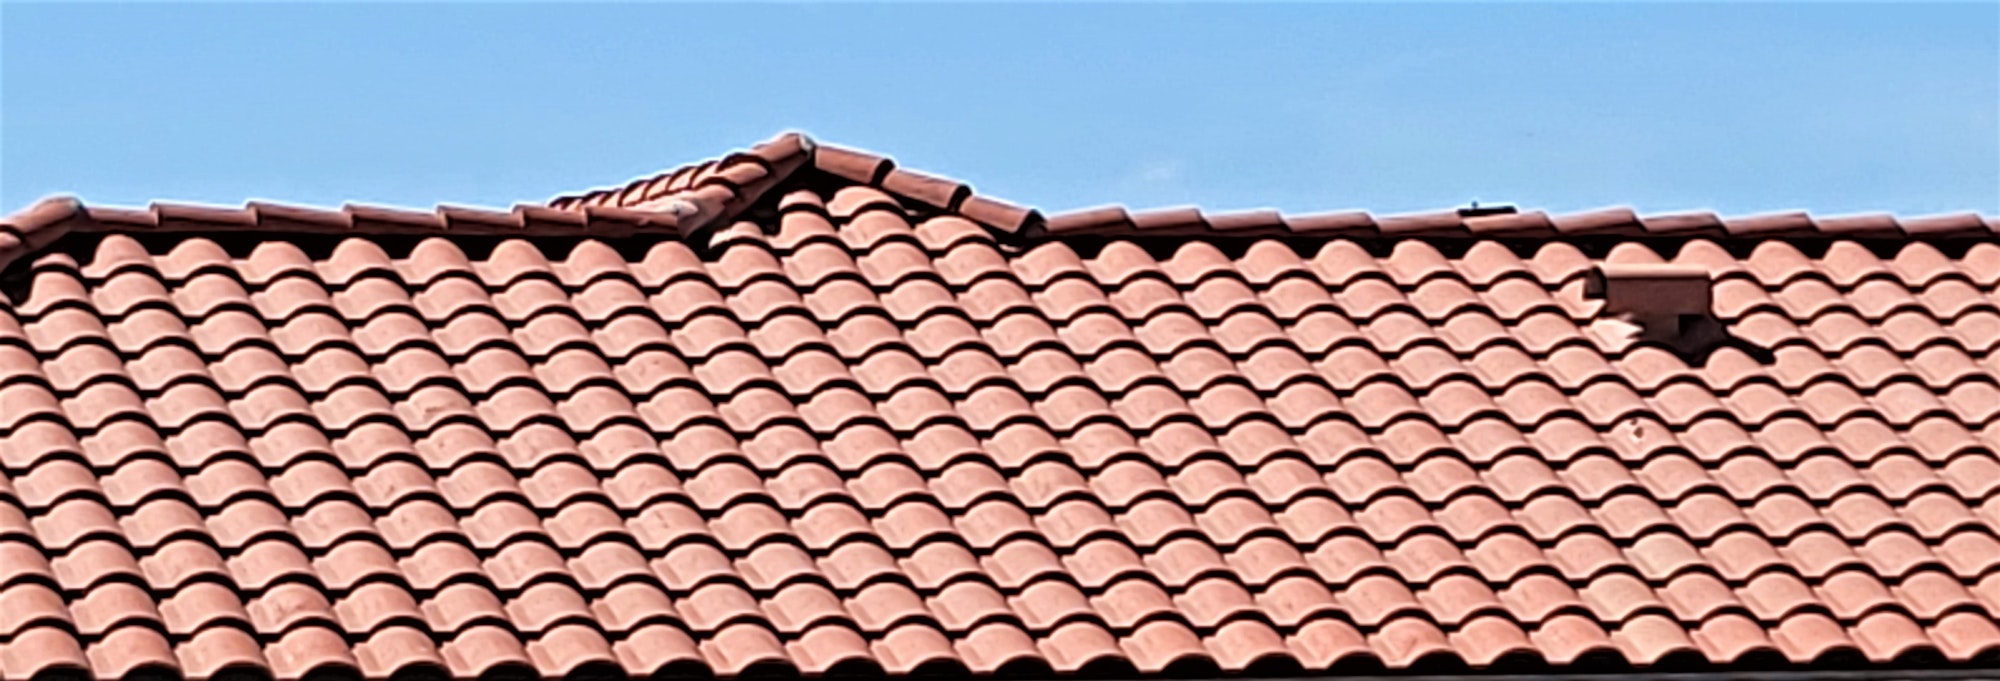 Red Tile Roof! Shaped Roof Tiles on the Roof of a Home Under a Beautiful Sky of Blue!